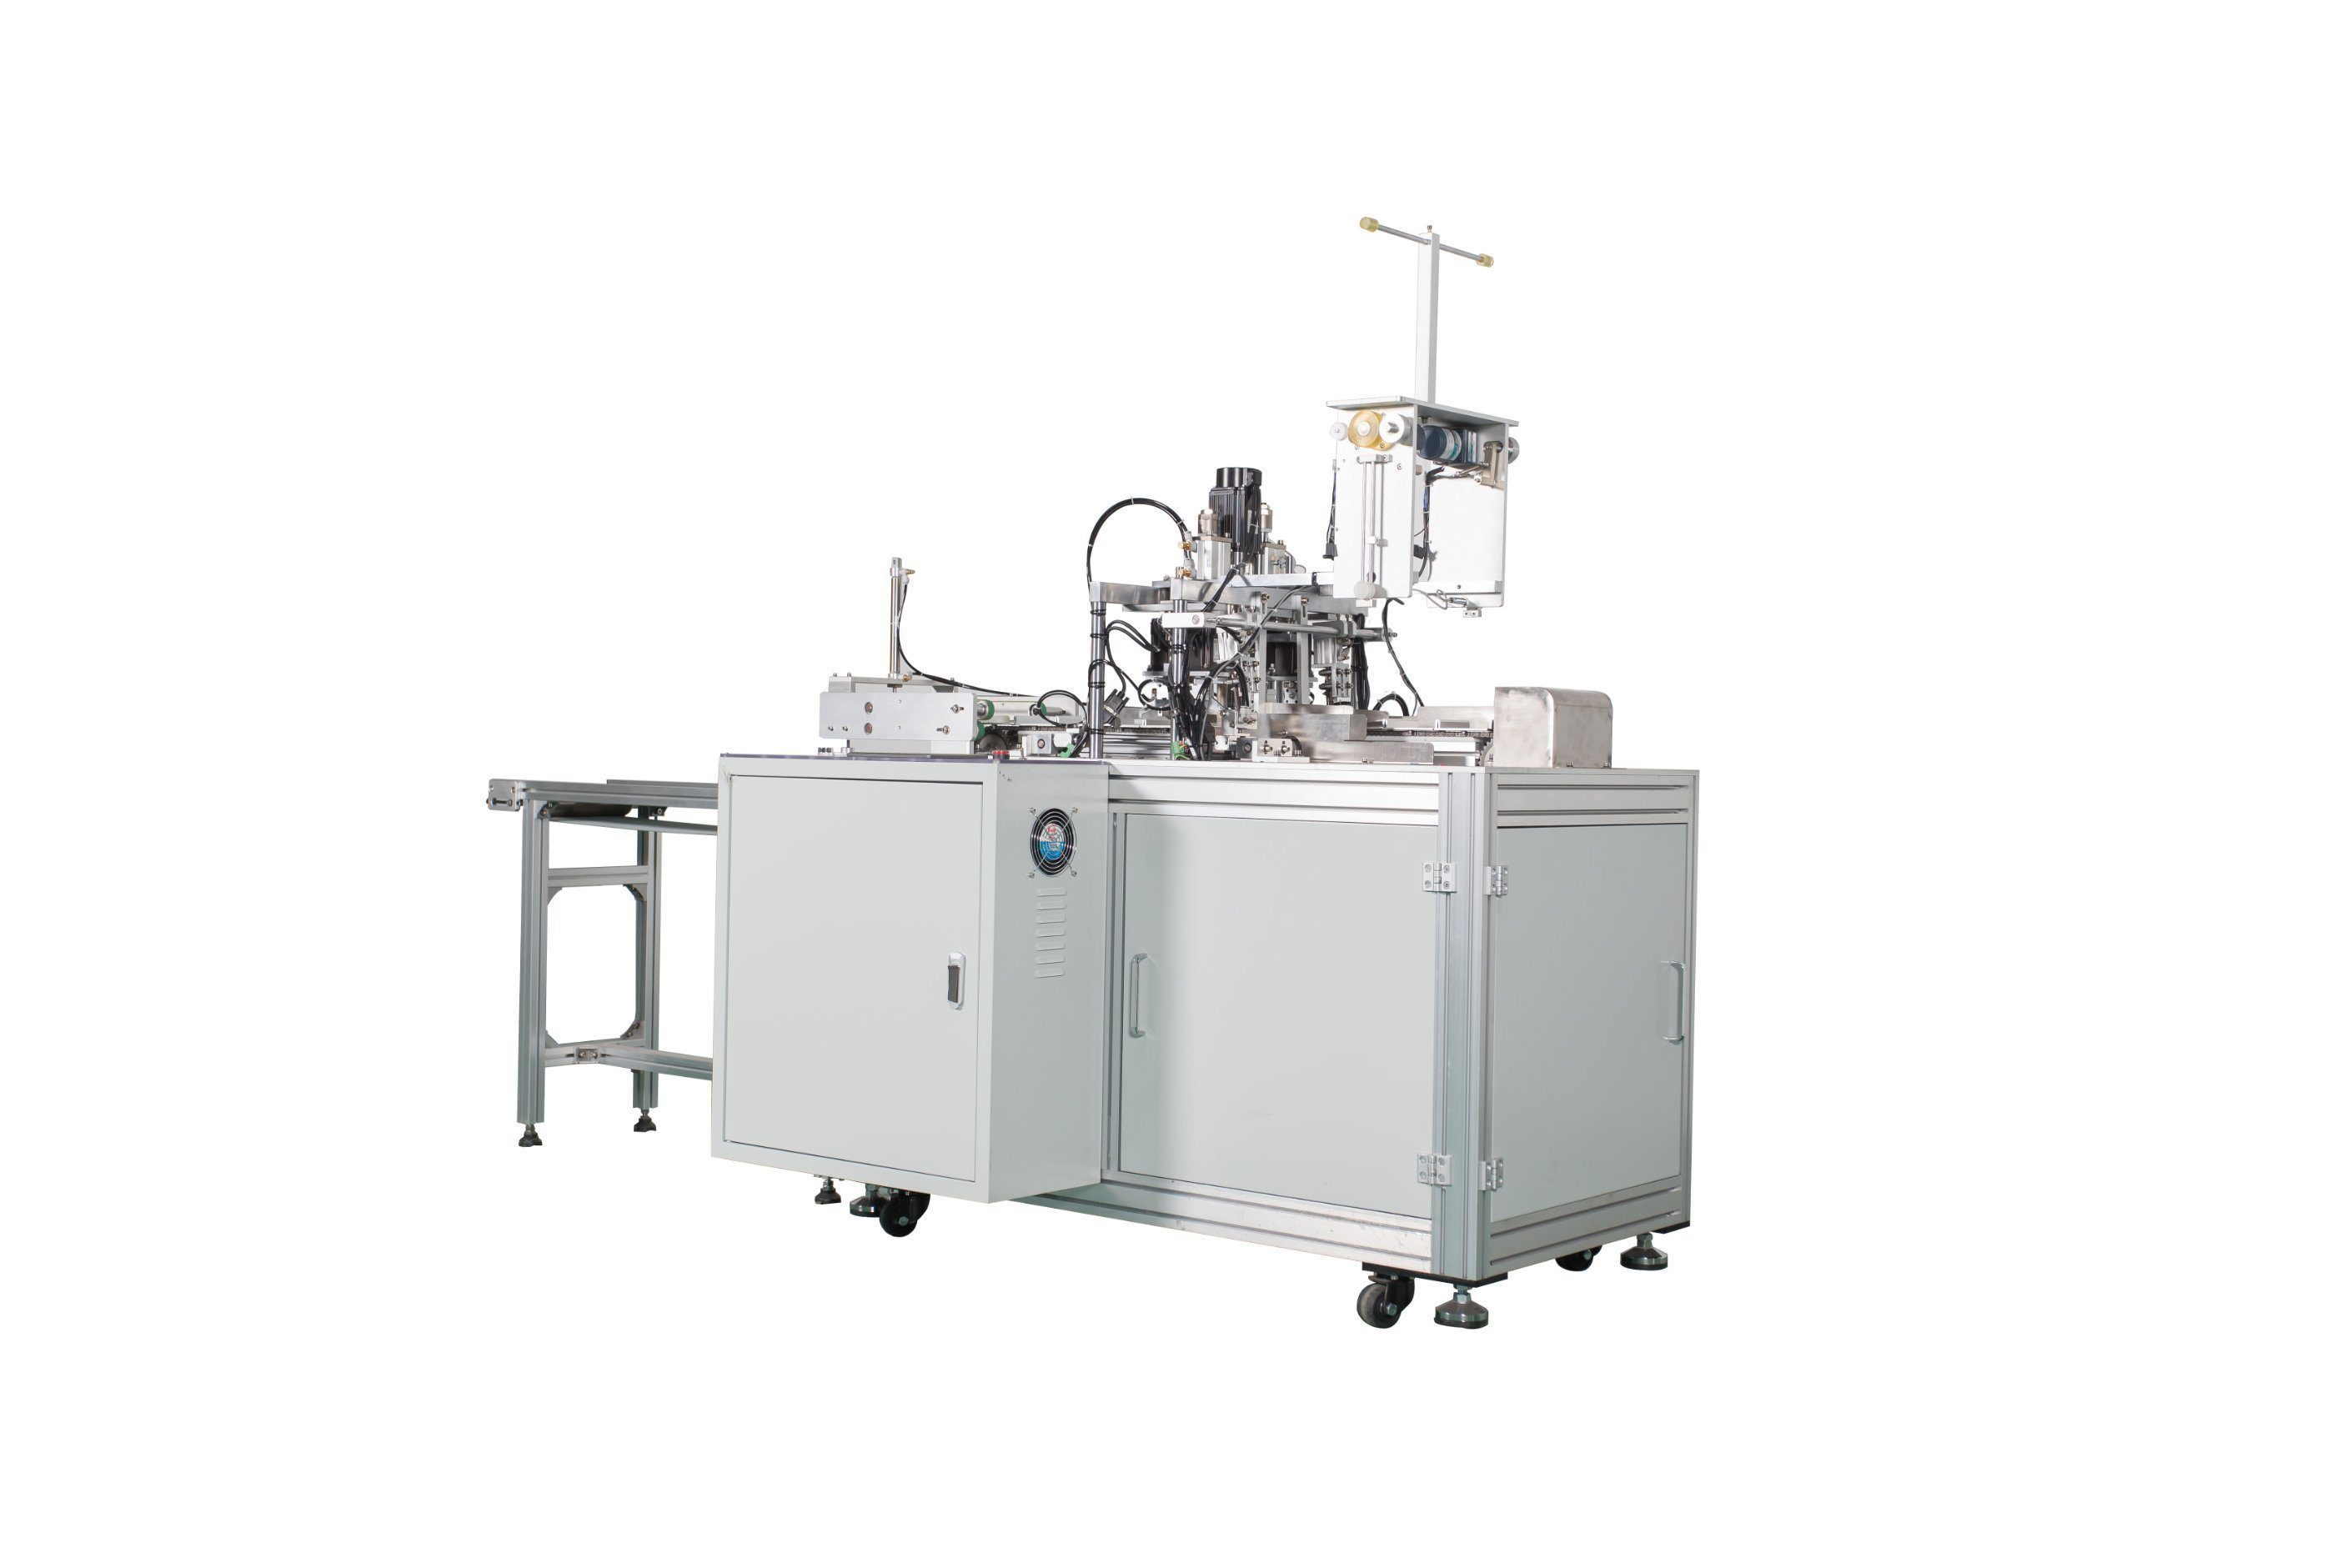 Textile Weaving Machines Price Surgical Cotton Waste Process Mask Machine (Practical Type)